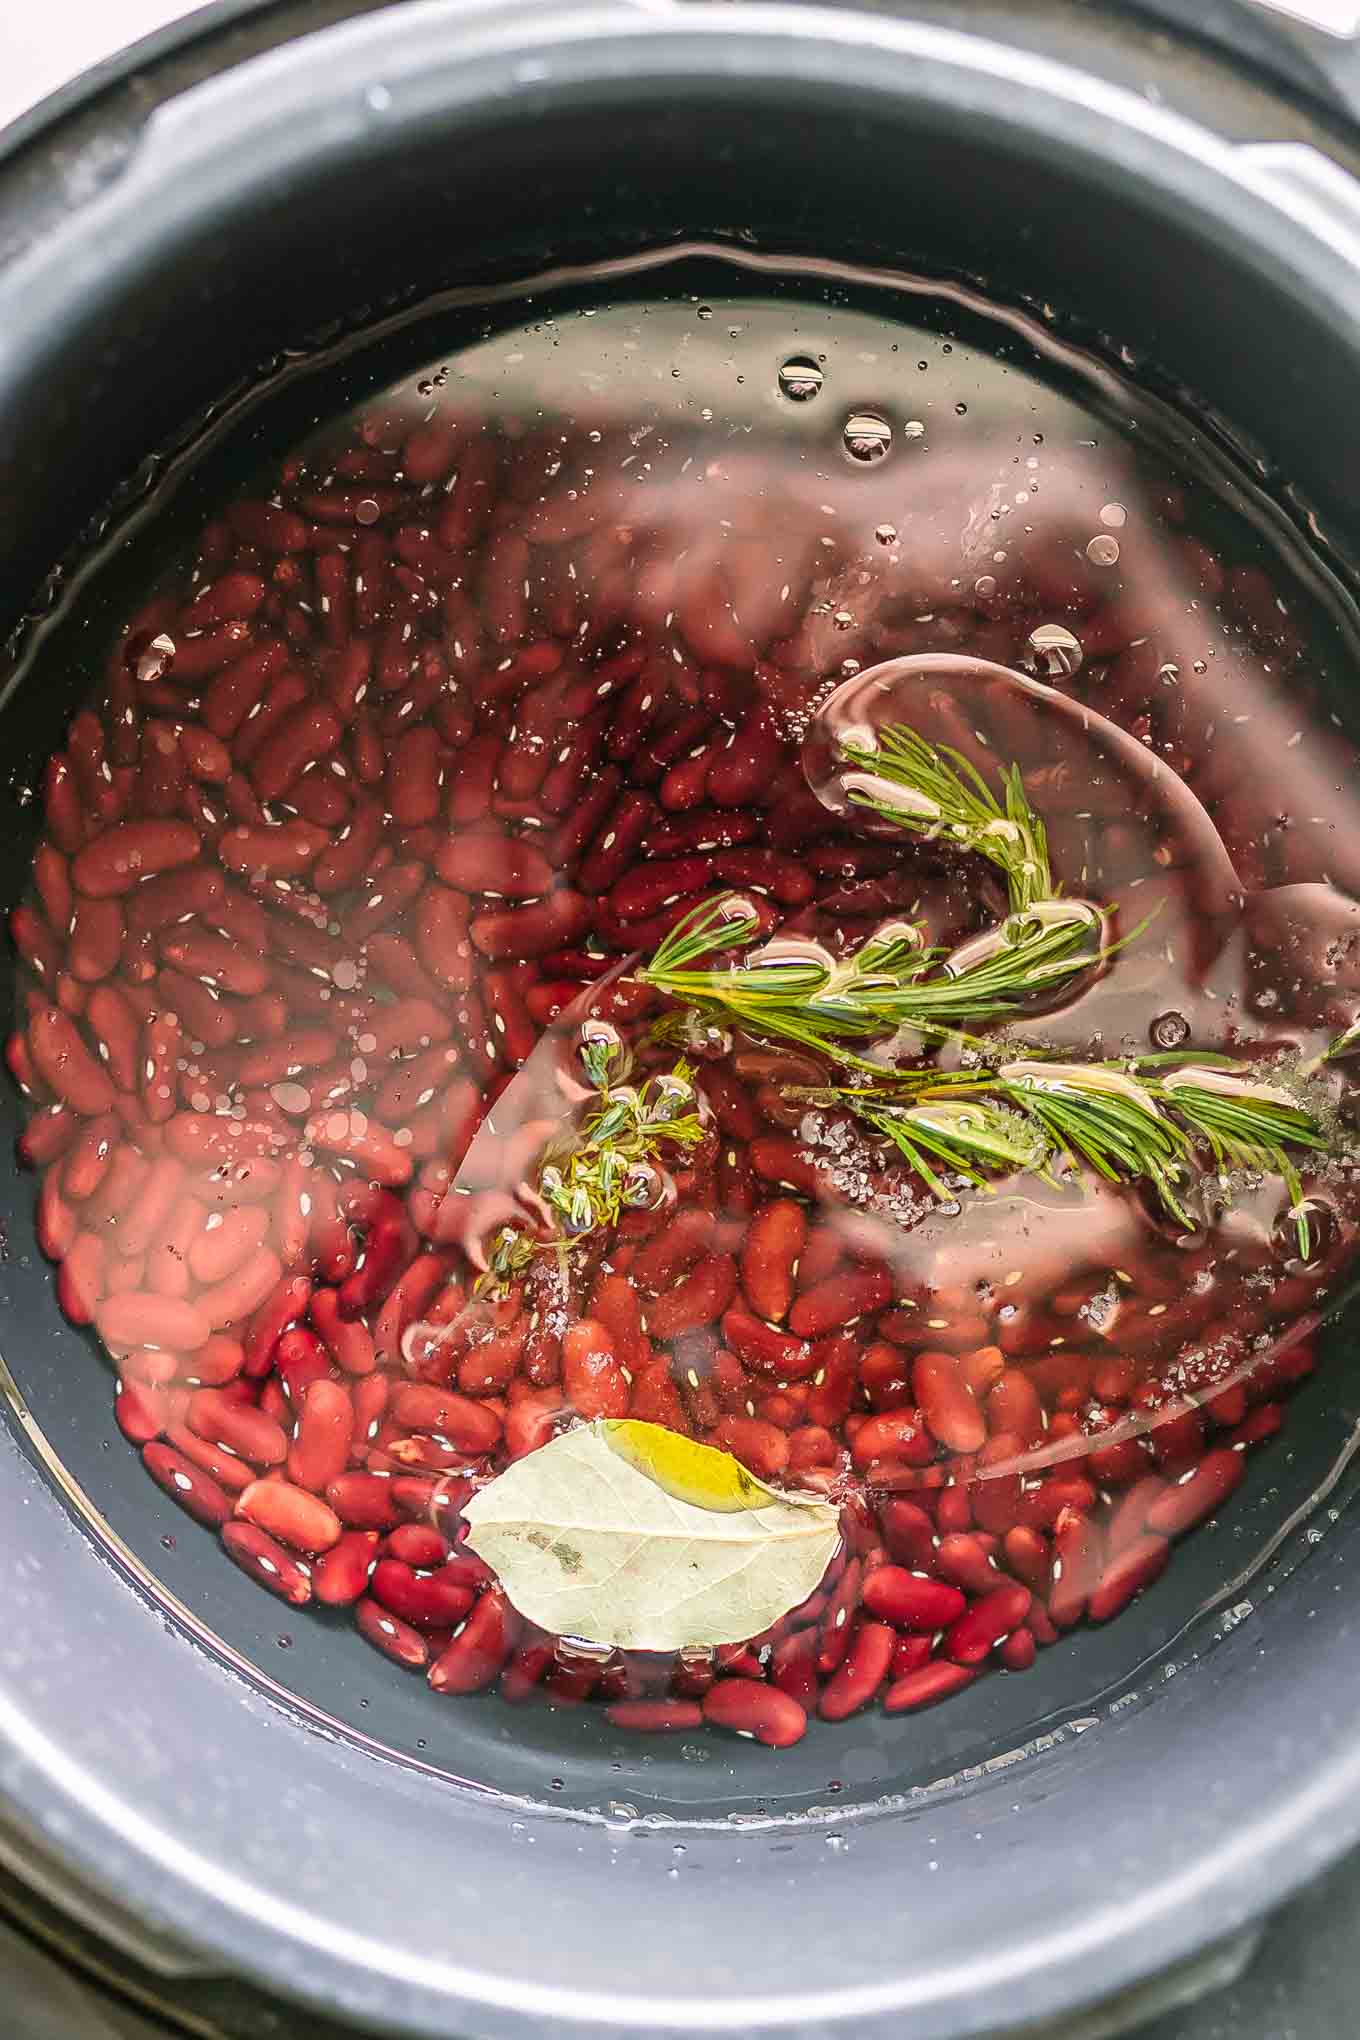 kidney beans in water inside a pressure cooker with herbs